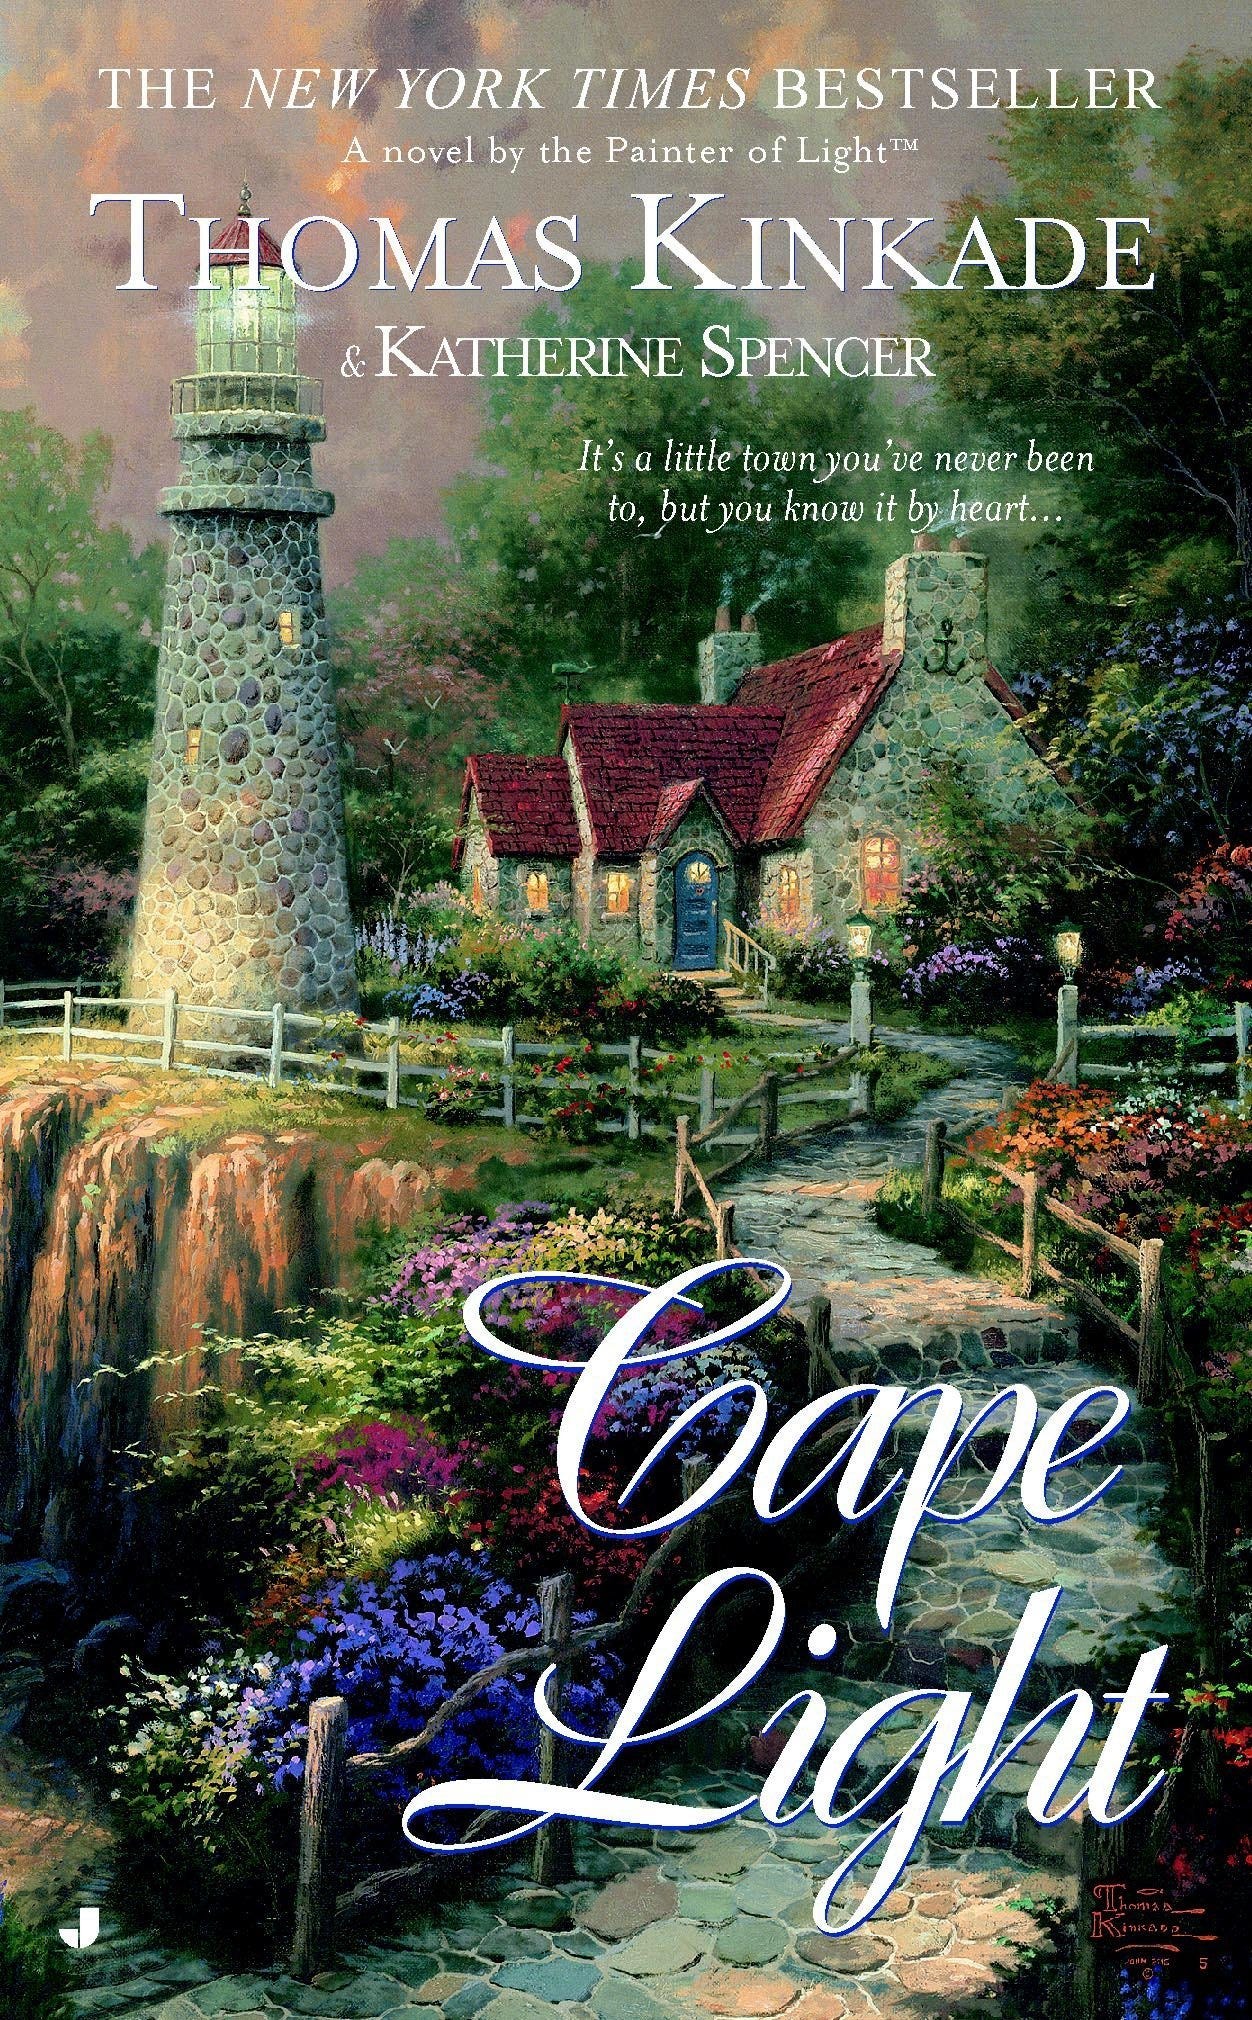 Painting on the book cover shows a small stone house beside a lighthouse in the midst of trees and flowers